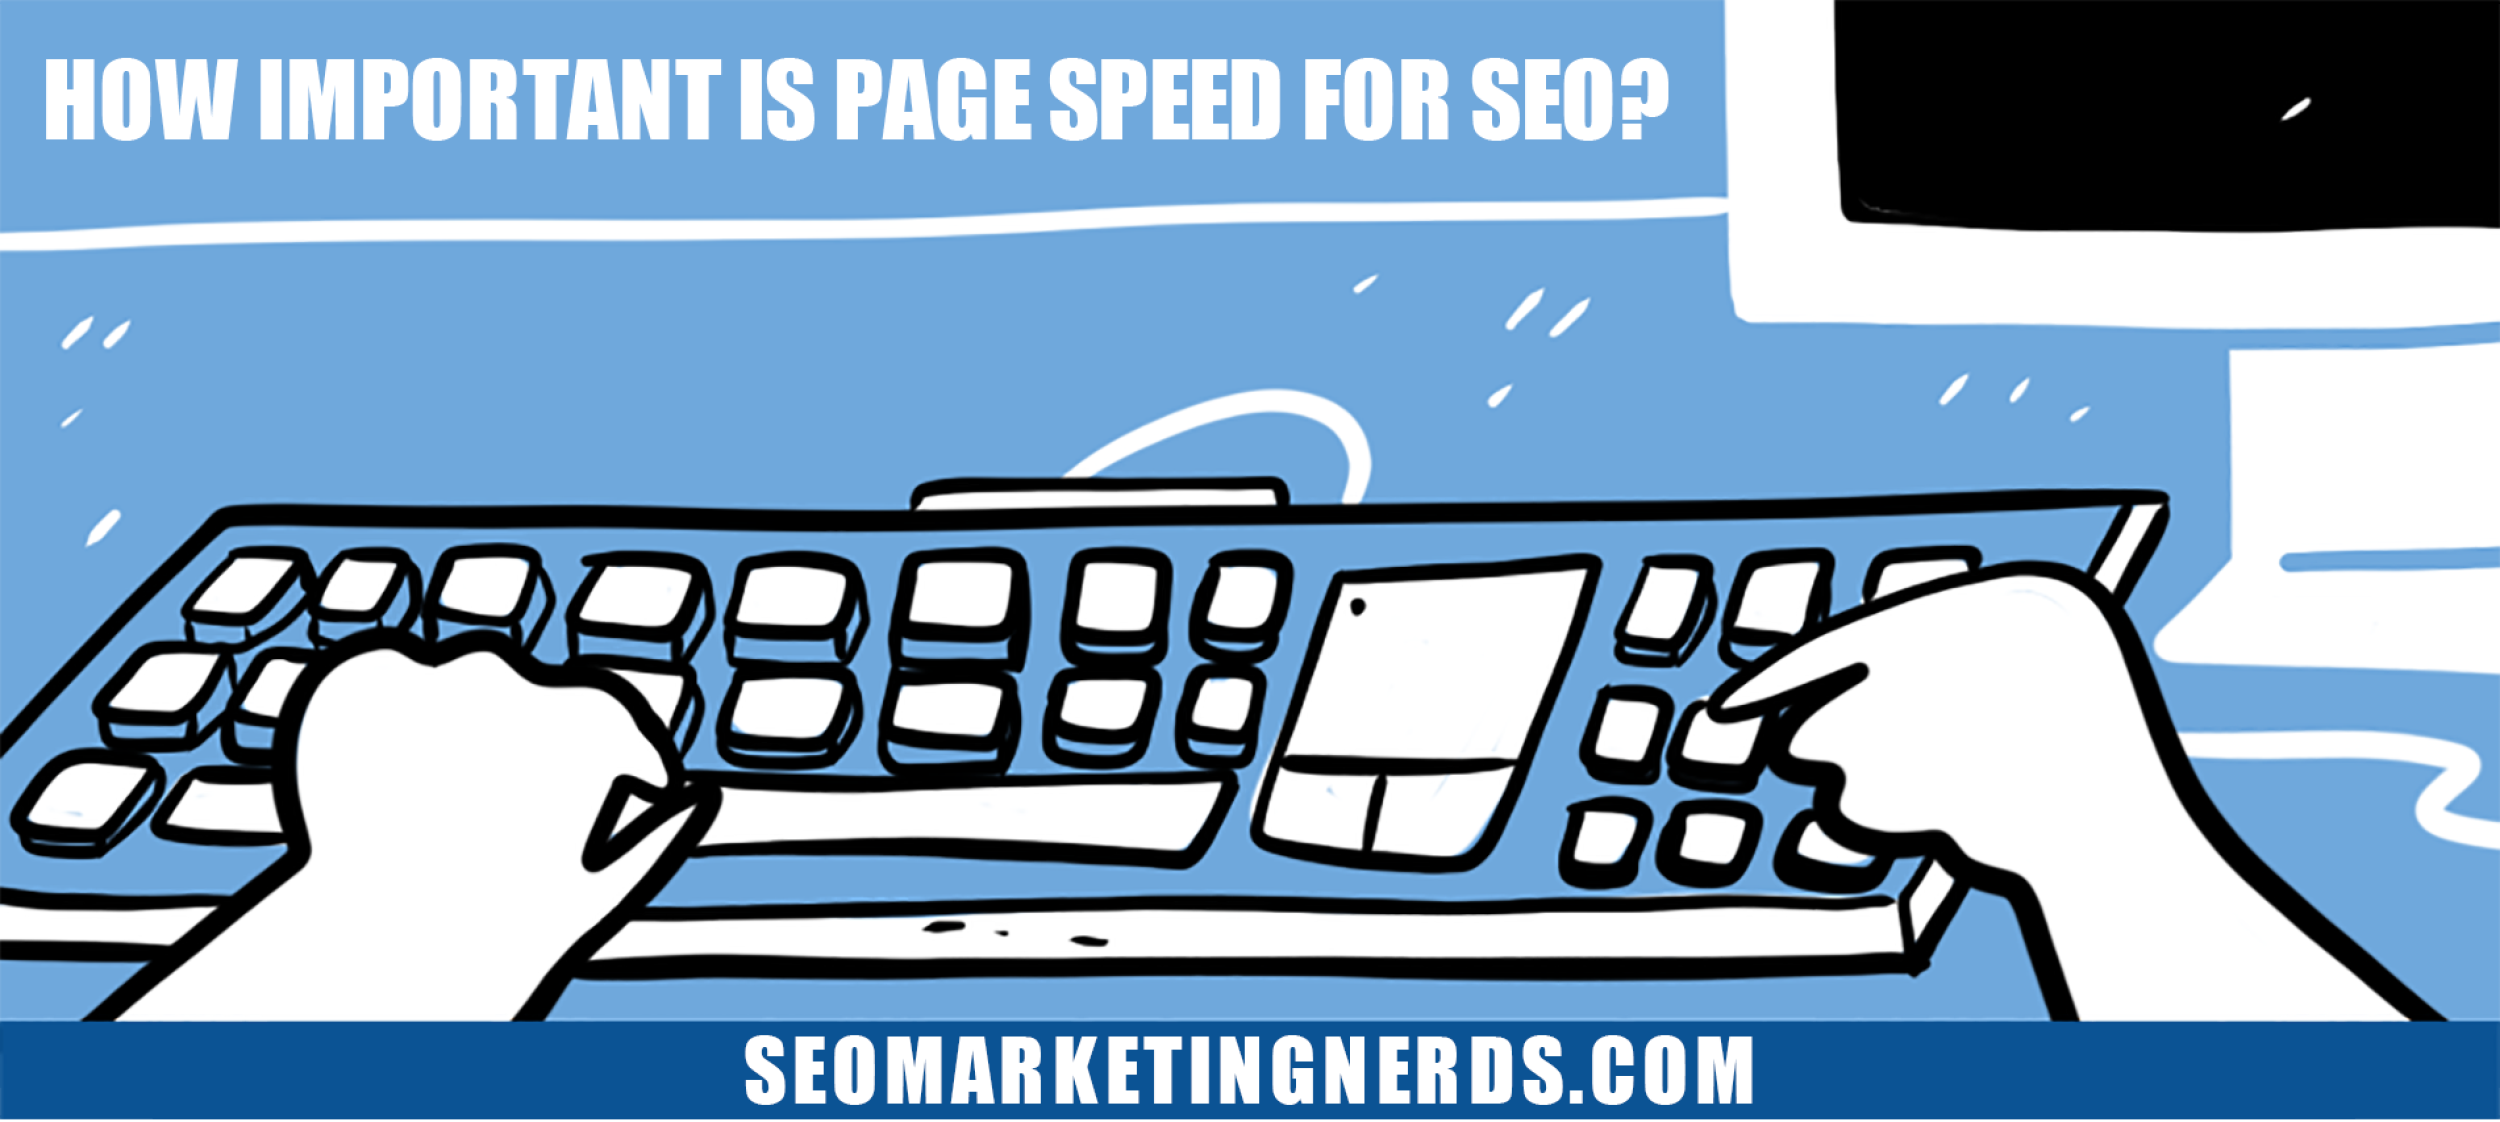 How Important is Page Speed For SEO?